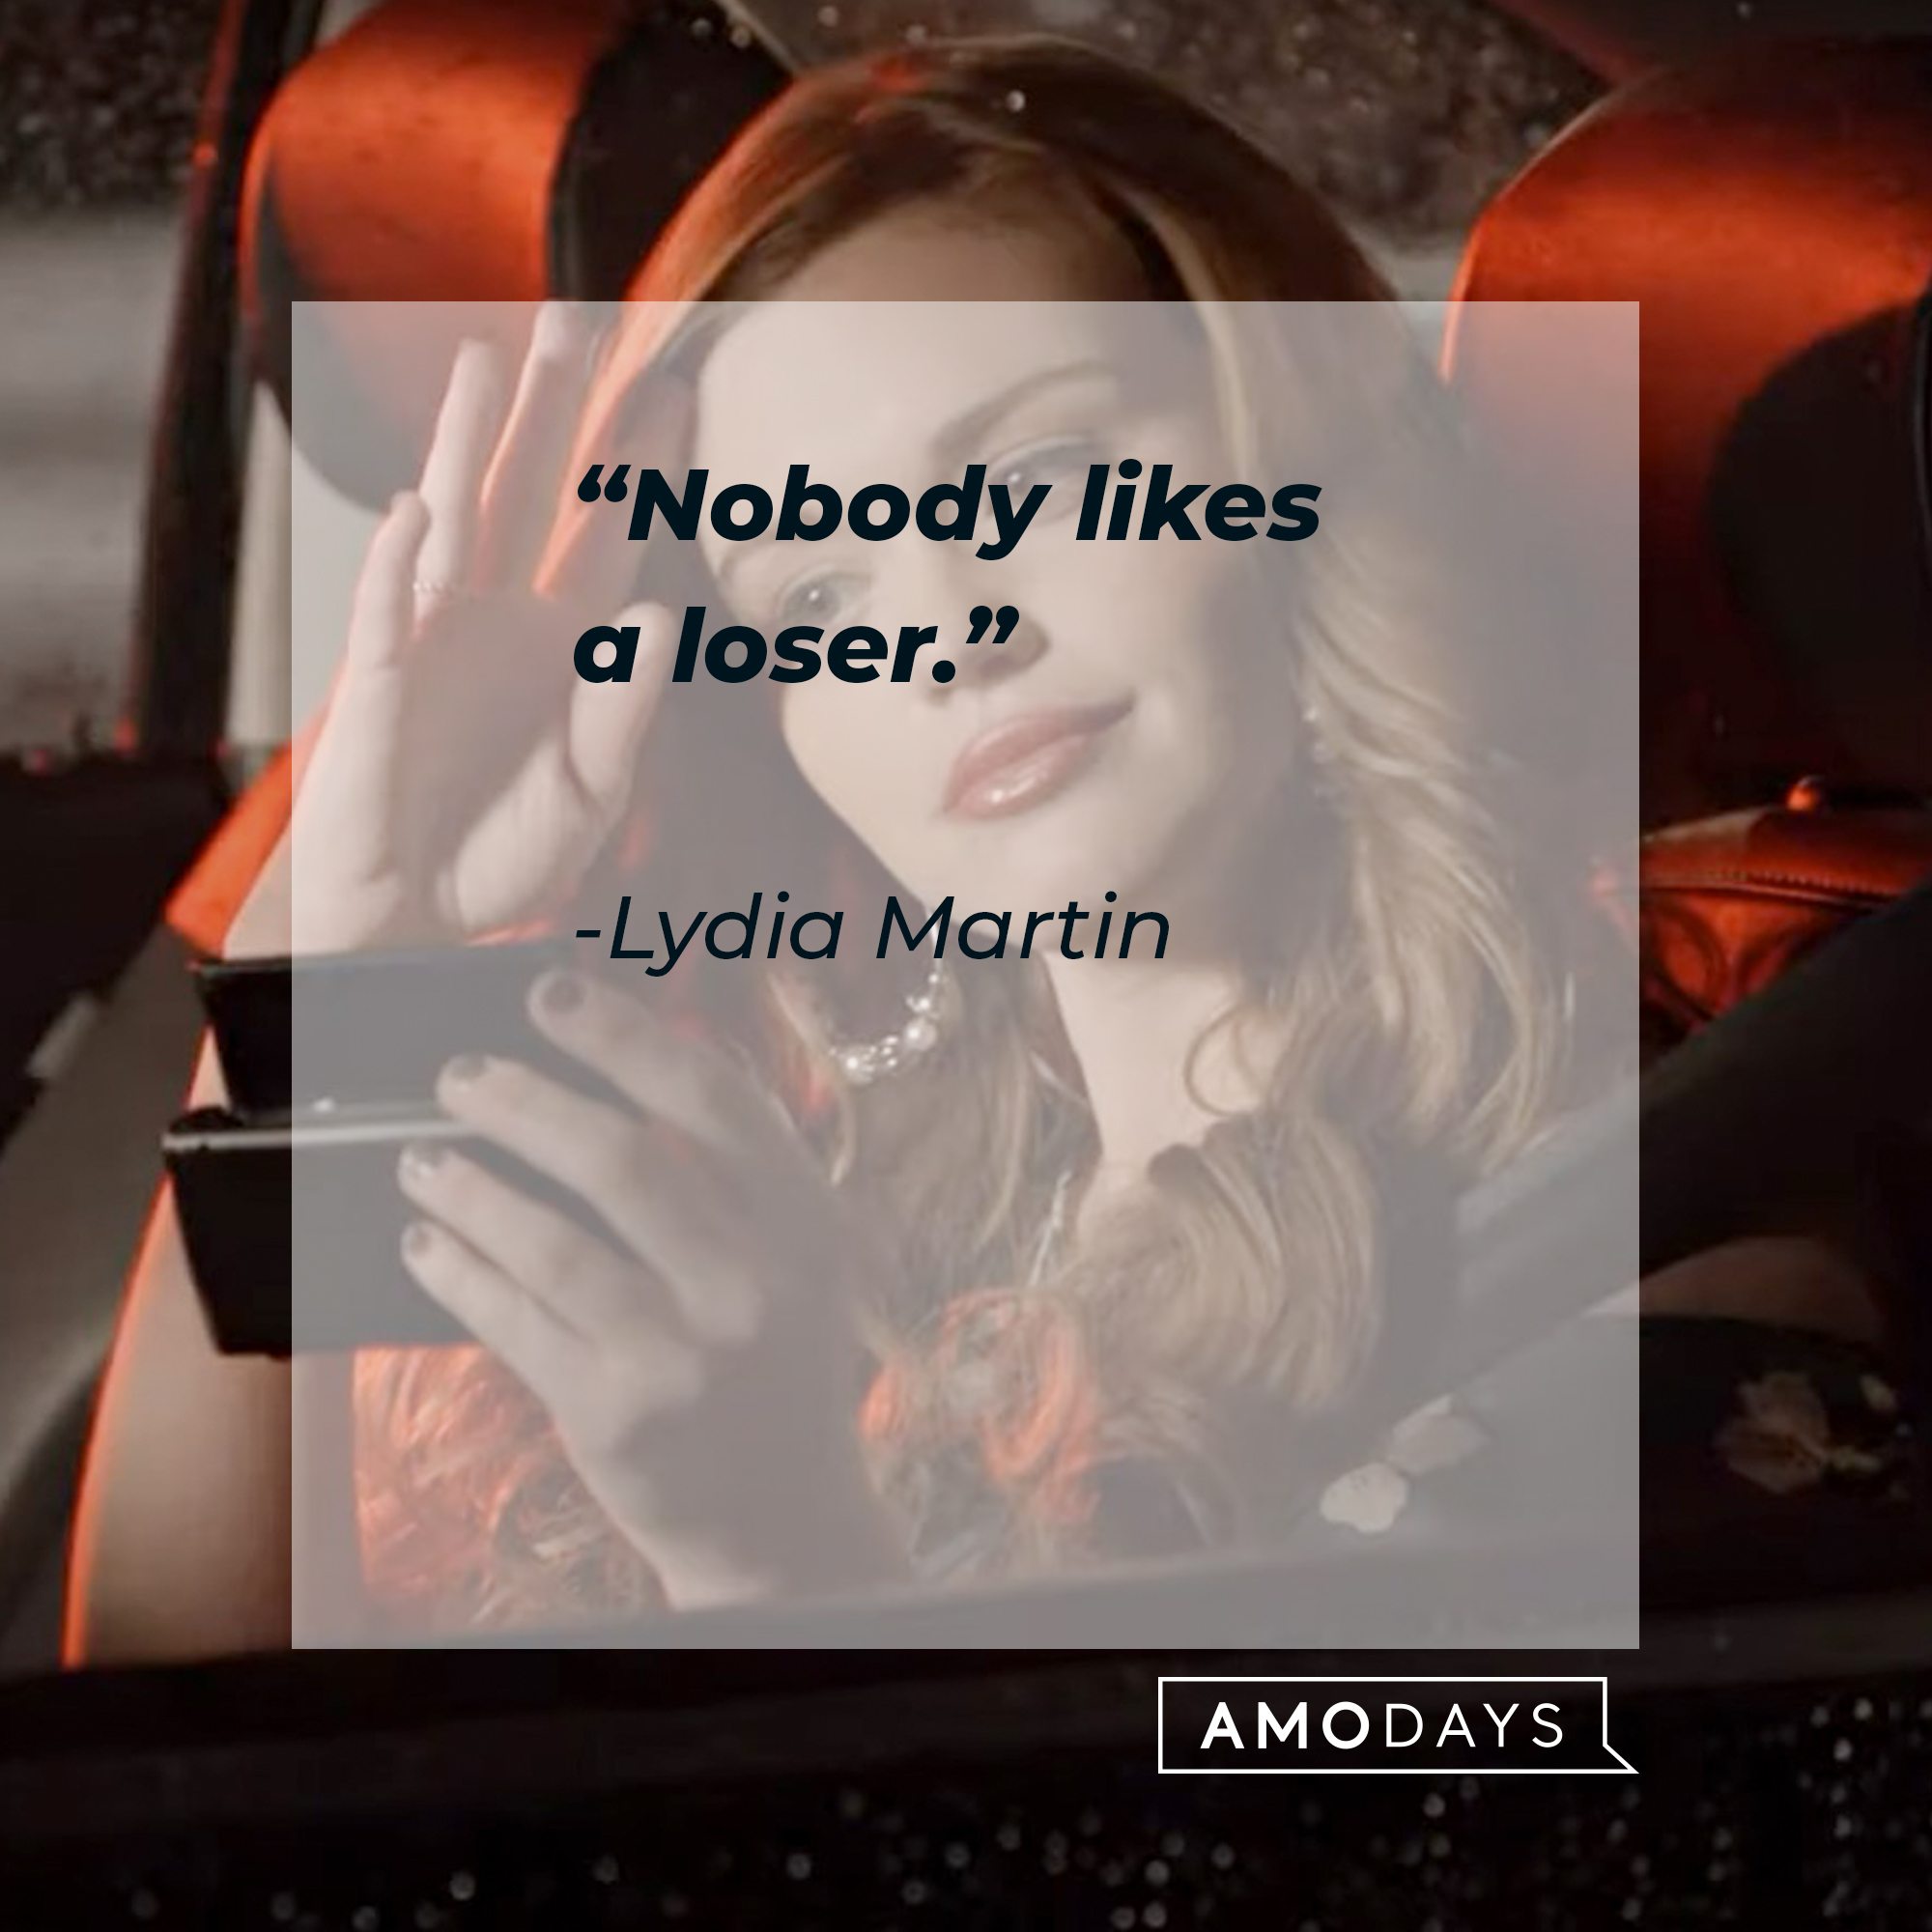 Lydia Martin with her quote: ”Nobody likes a loser.” | Source: facebook.com/TeenWolf